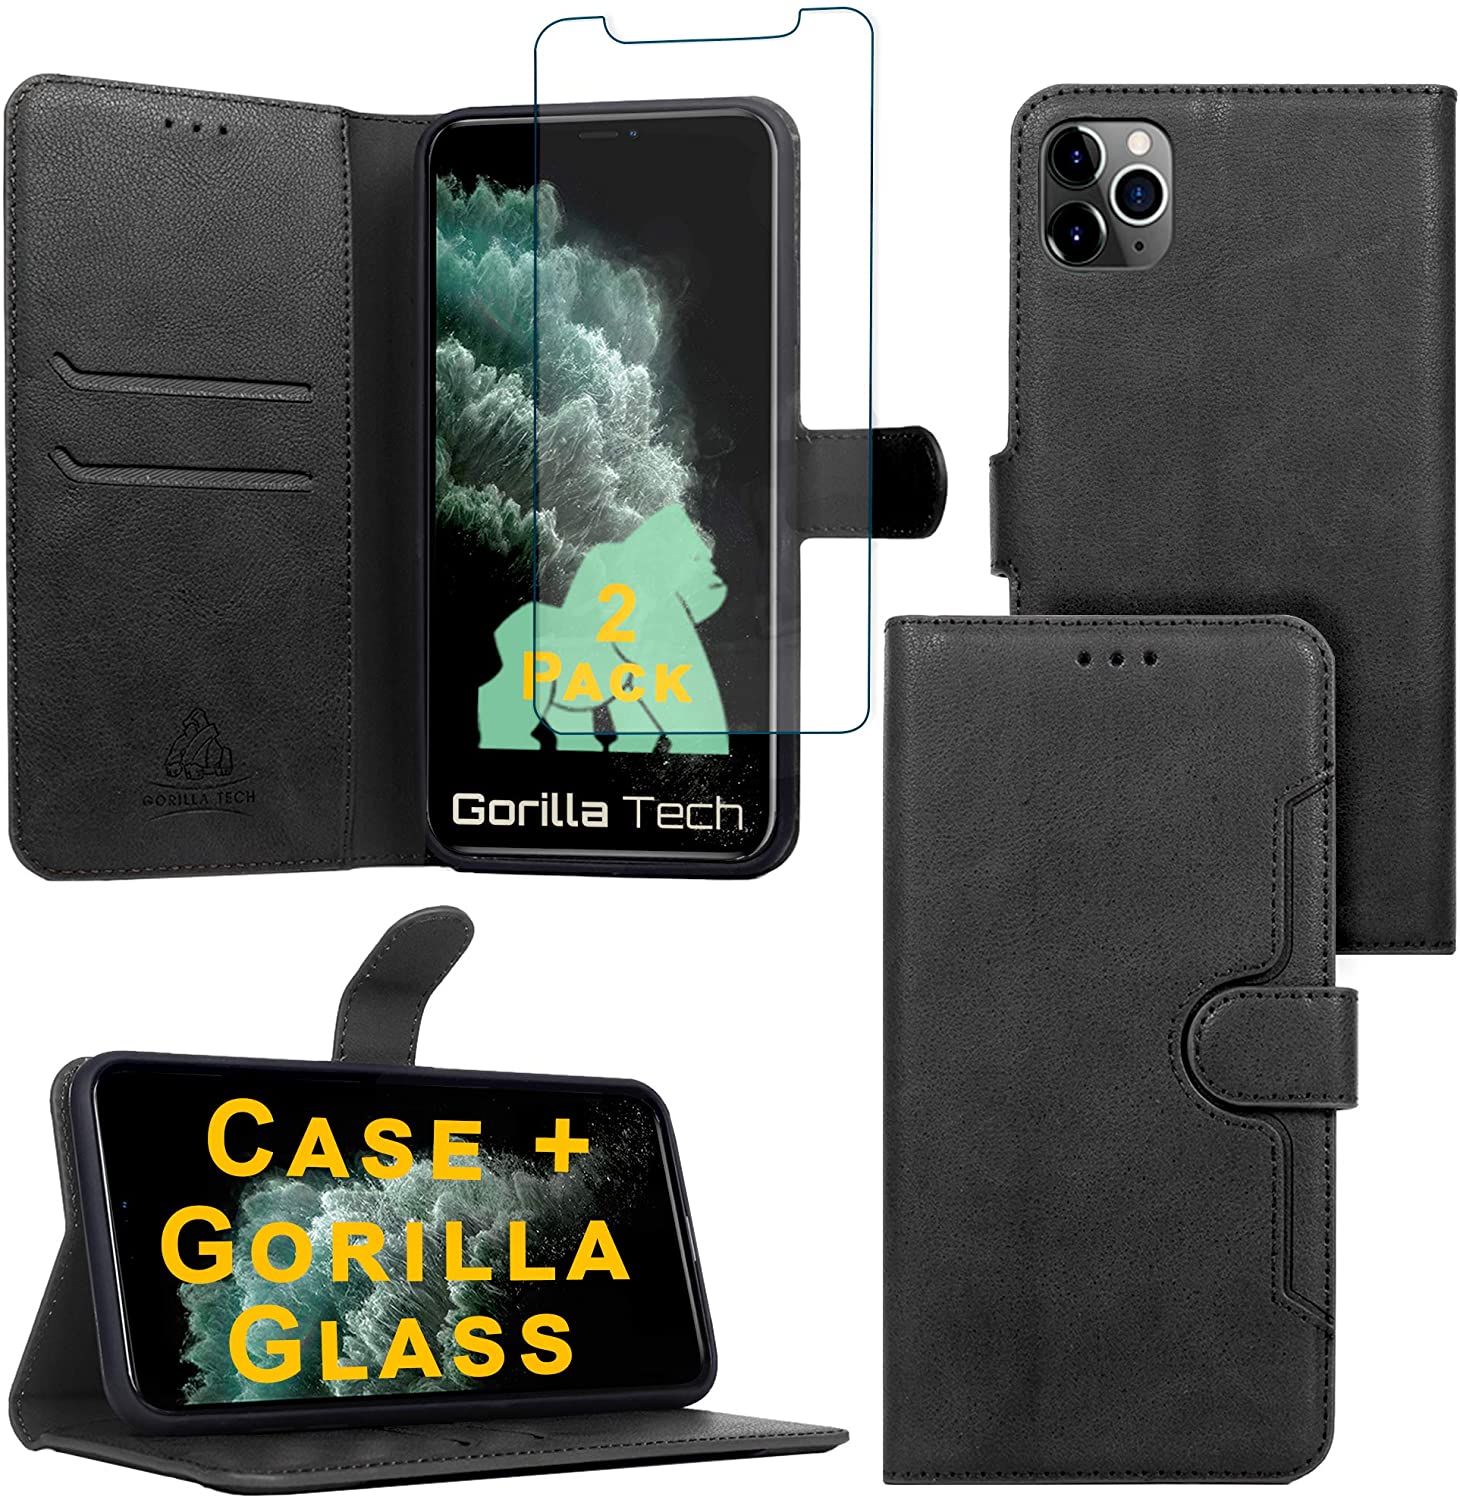 iPhone 8 Screen Protectors and Cases